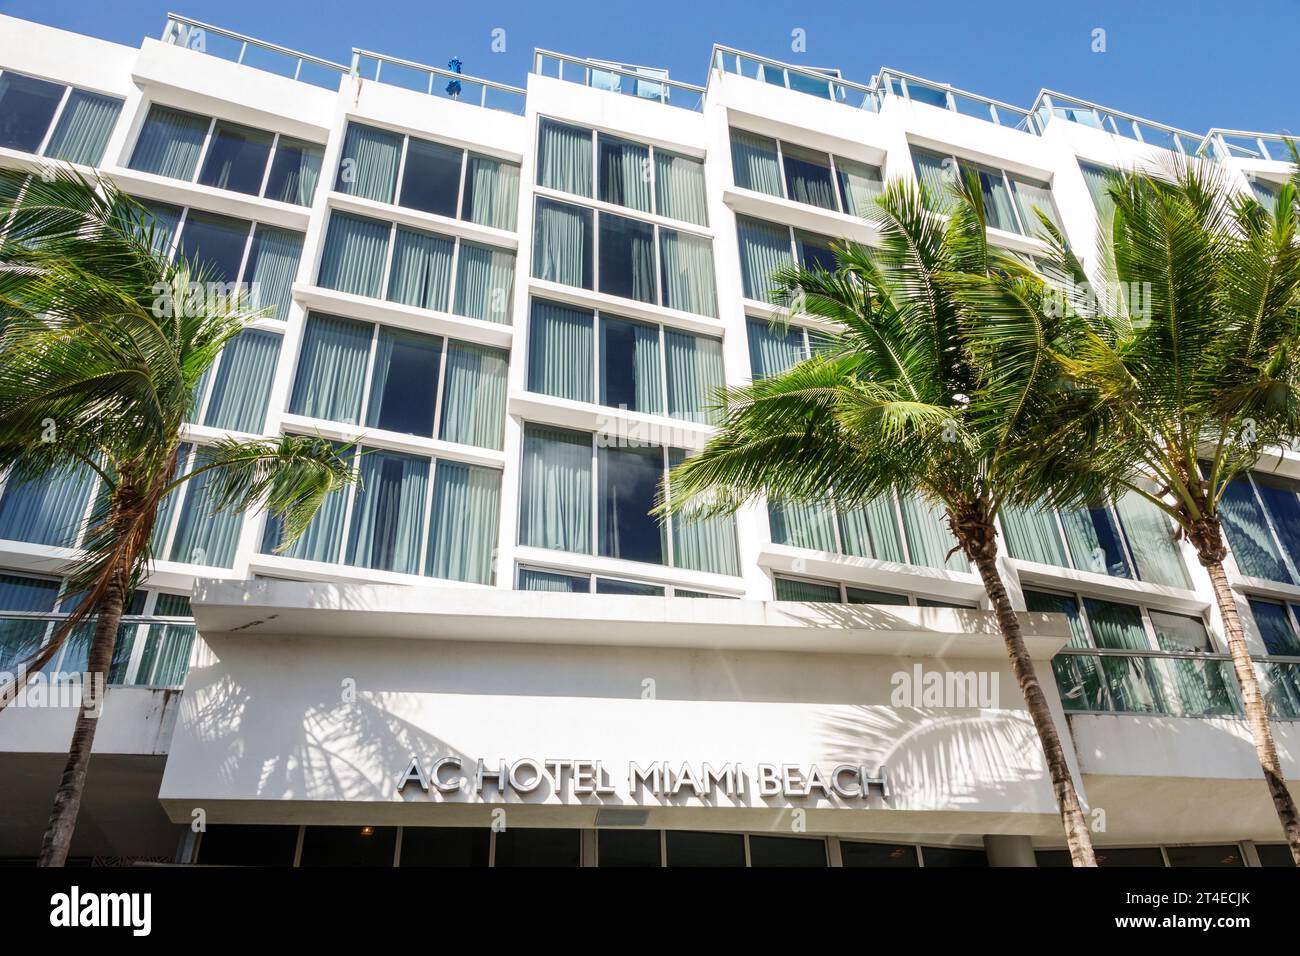 Miami Beach Florida,outside exterior,building front entrance hotel,Collins Avenue,AC Hotel by Marriott Miami Beach sign,hotels motels businesses Stock Photo